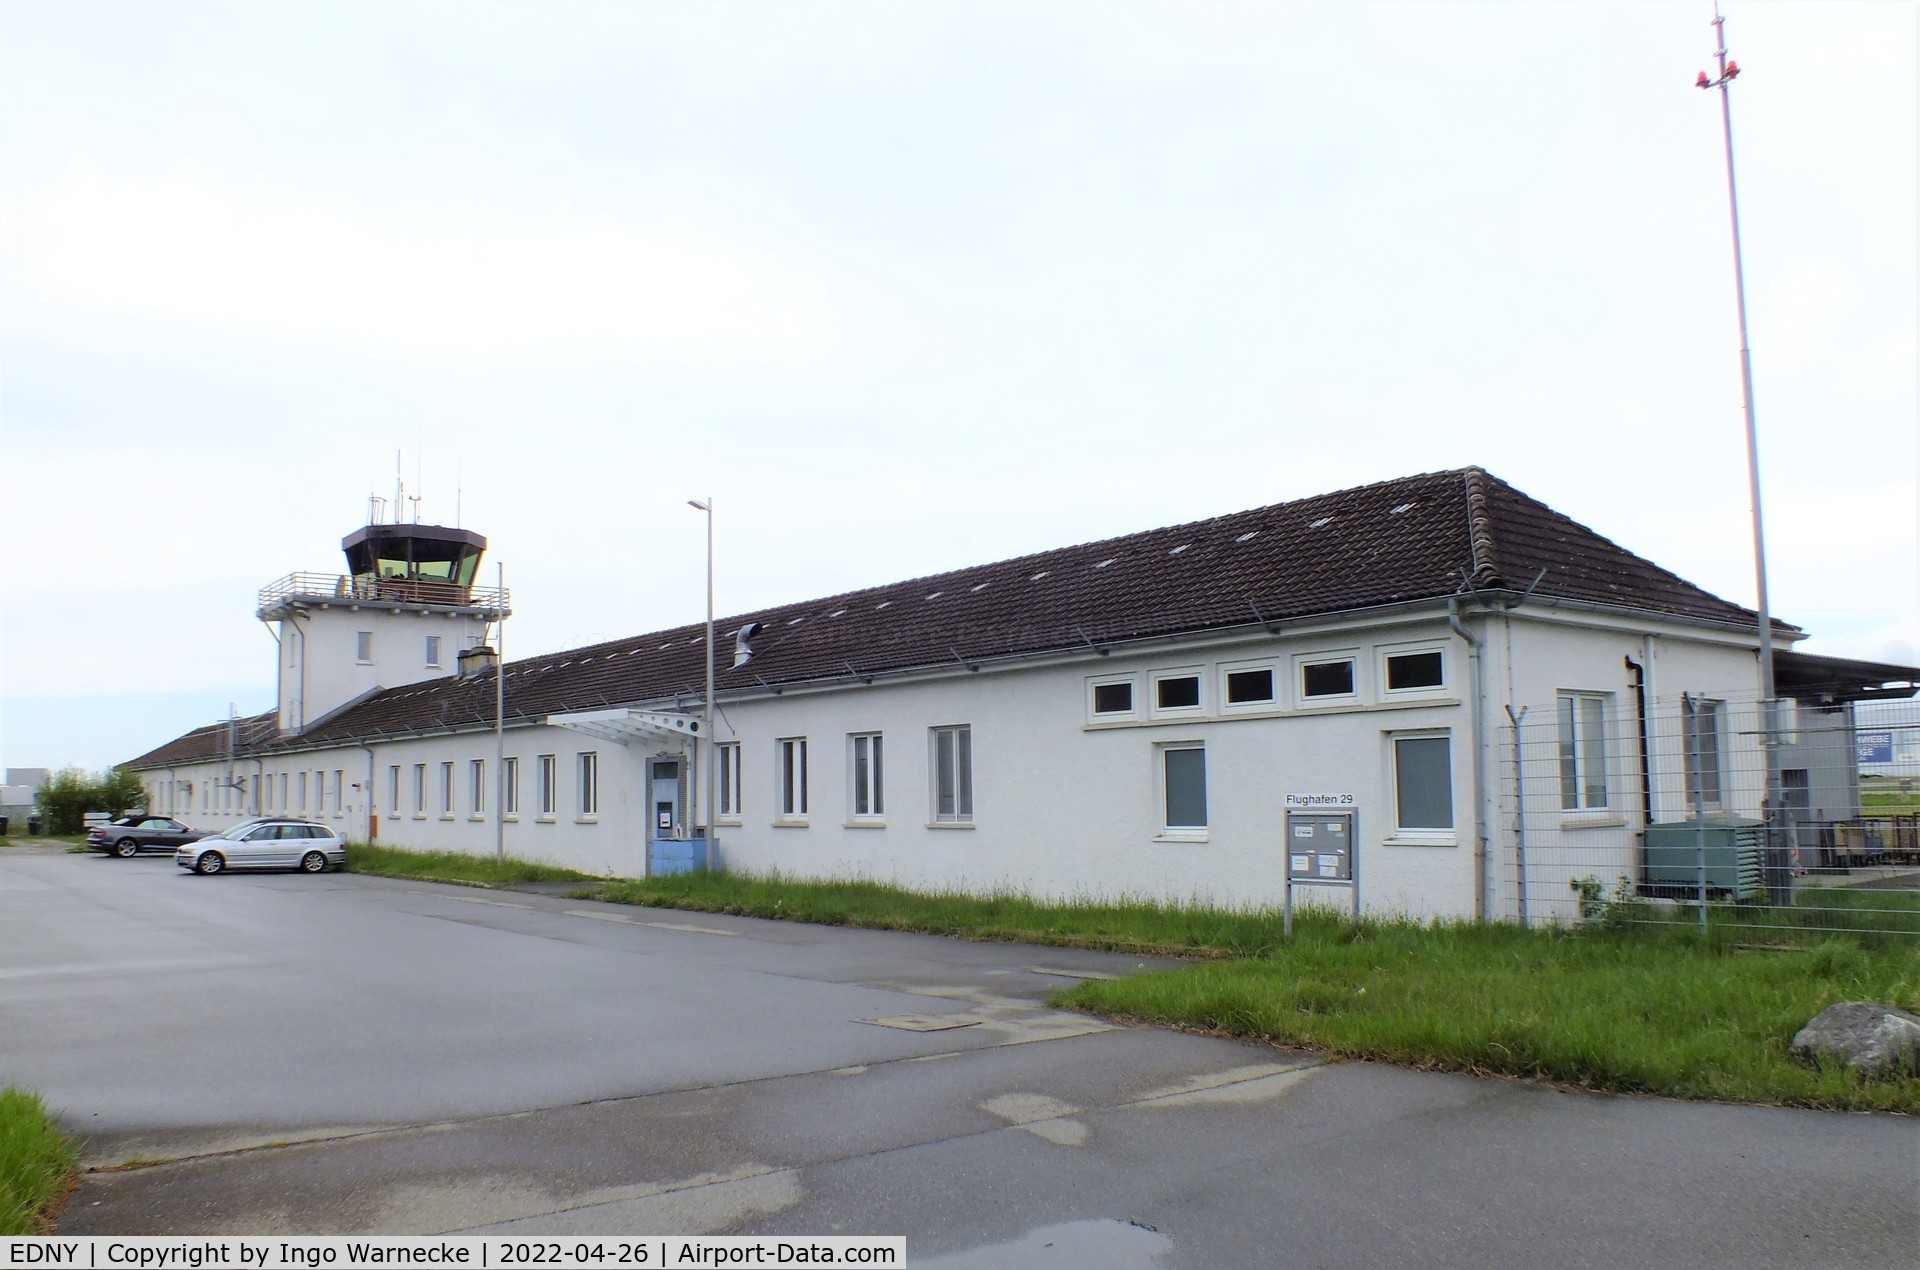 Bodensee Airport, Friedrichshafen Germany (EDNY) - landside view of the old terminal and tower at Friedrichshafen Bodensee airport